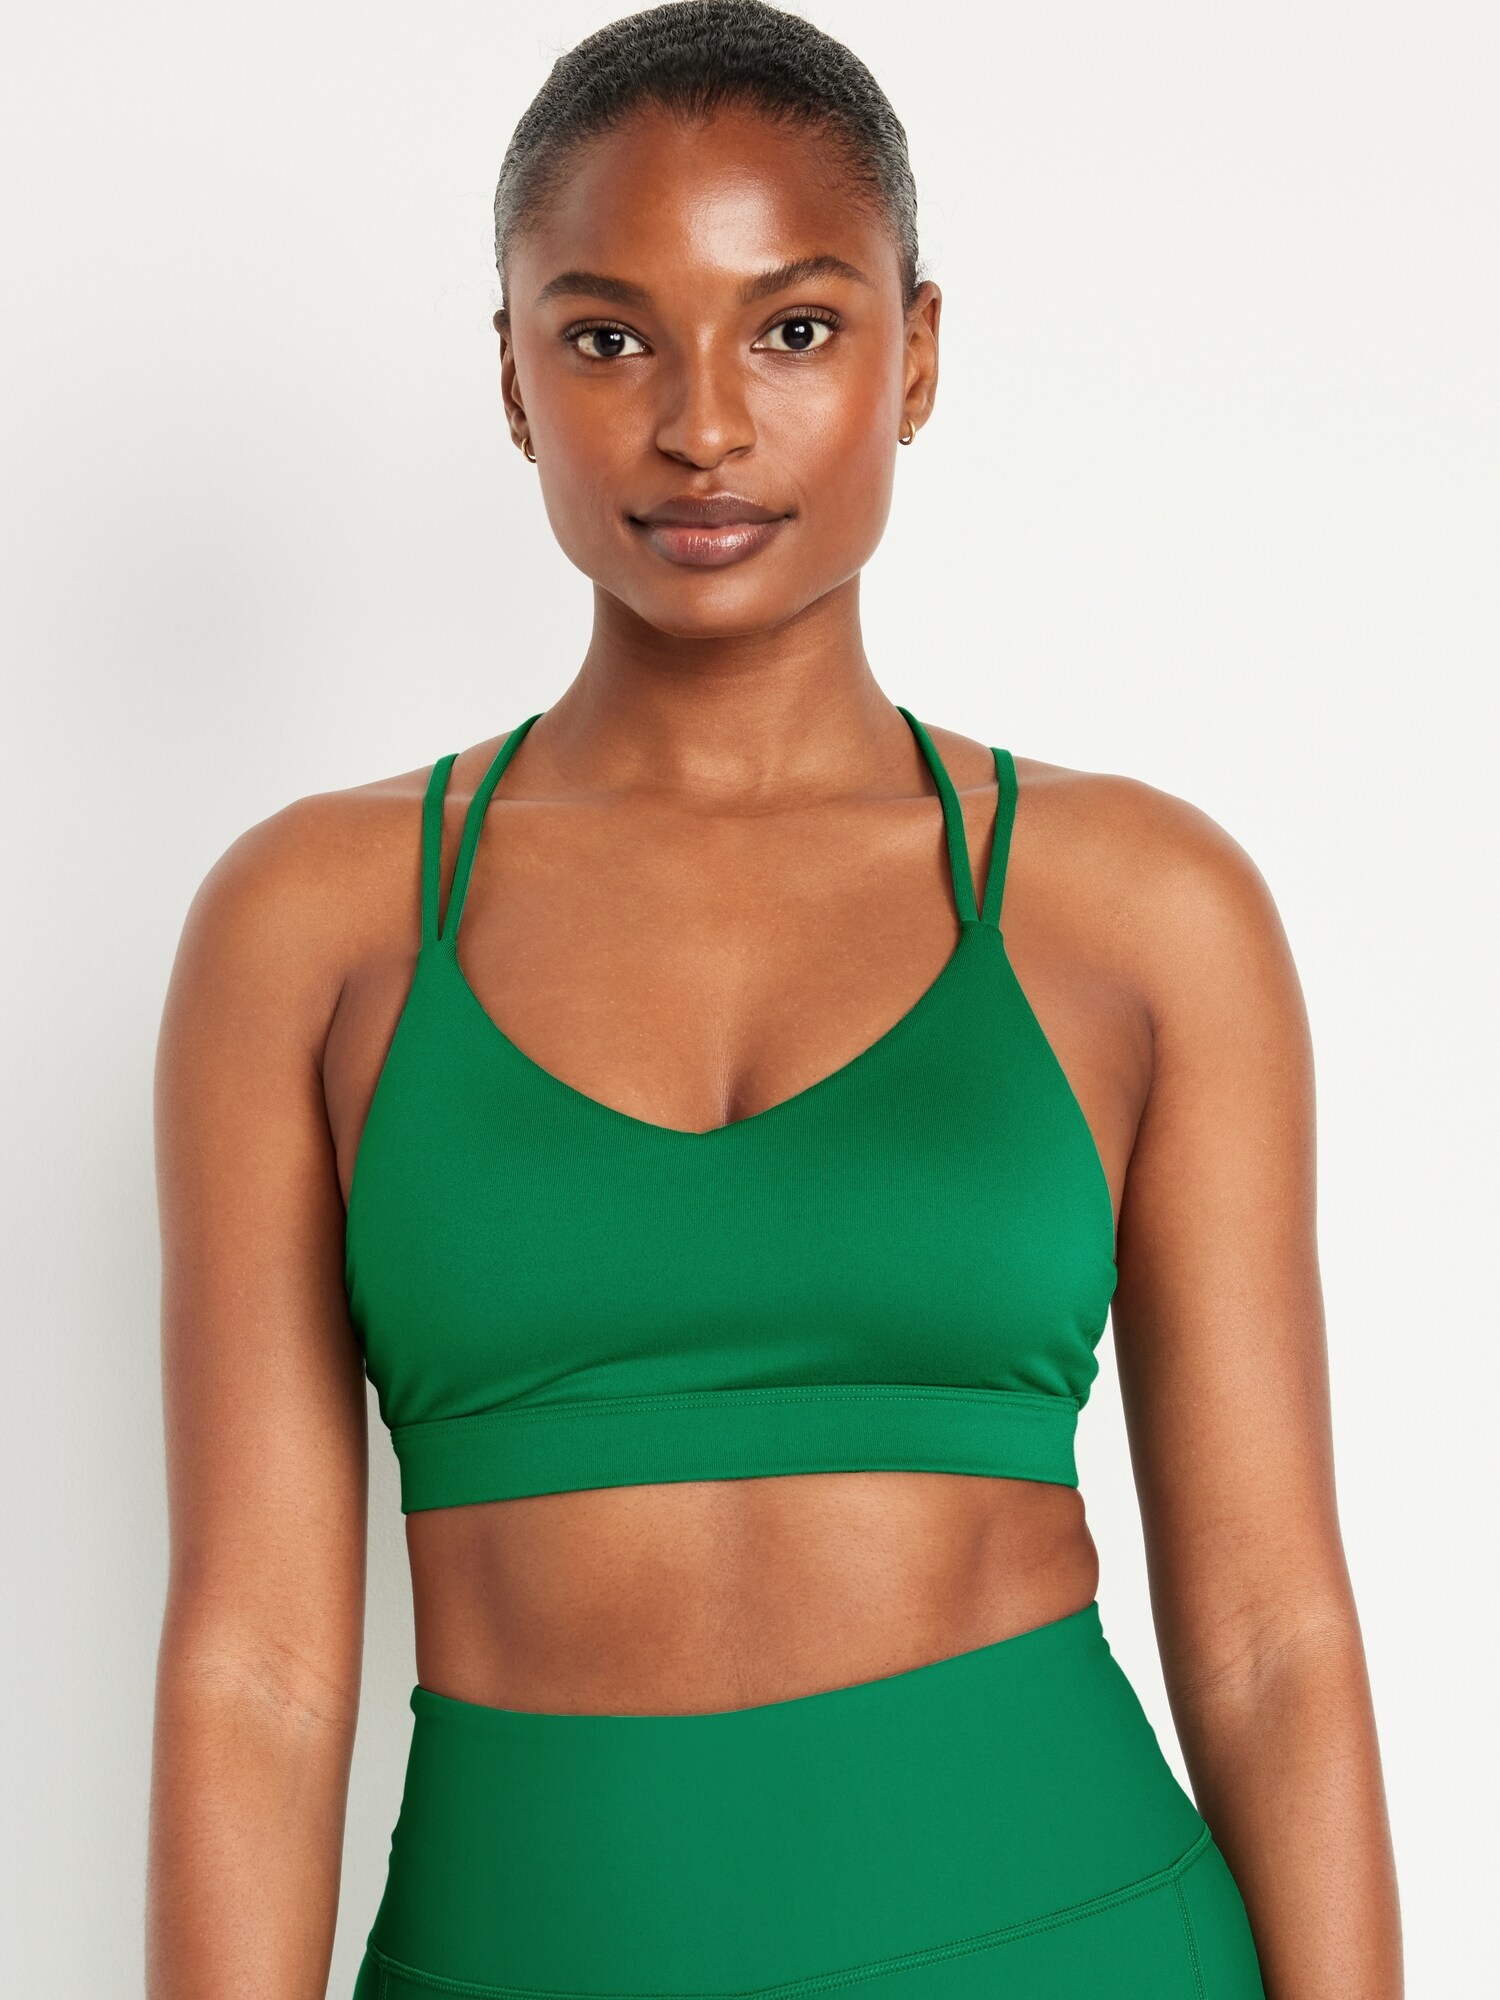 Women's Sports Bras with Adjustable Straps